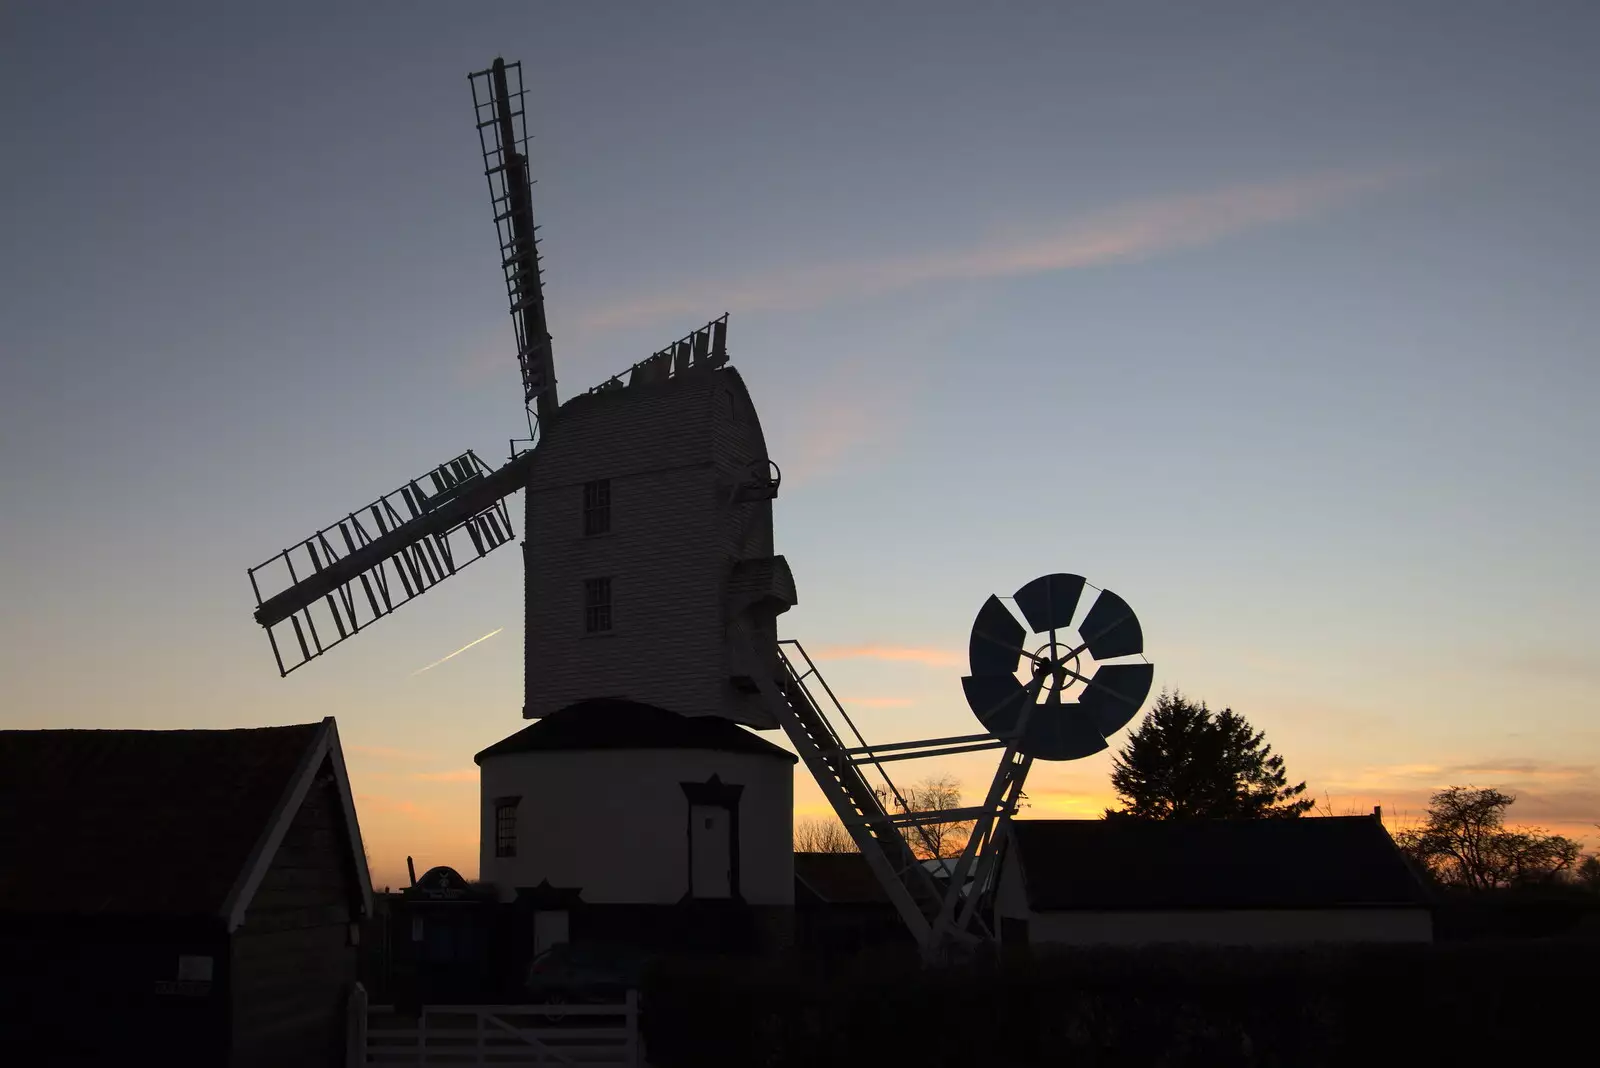 The sunset behind Saxtead Mill, from A Trip to Orford Castle, Orford, Suffolk - 26th February 2022